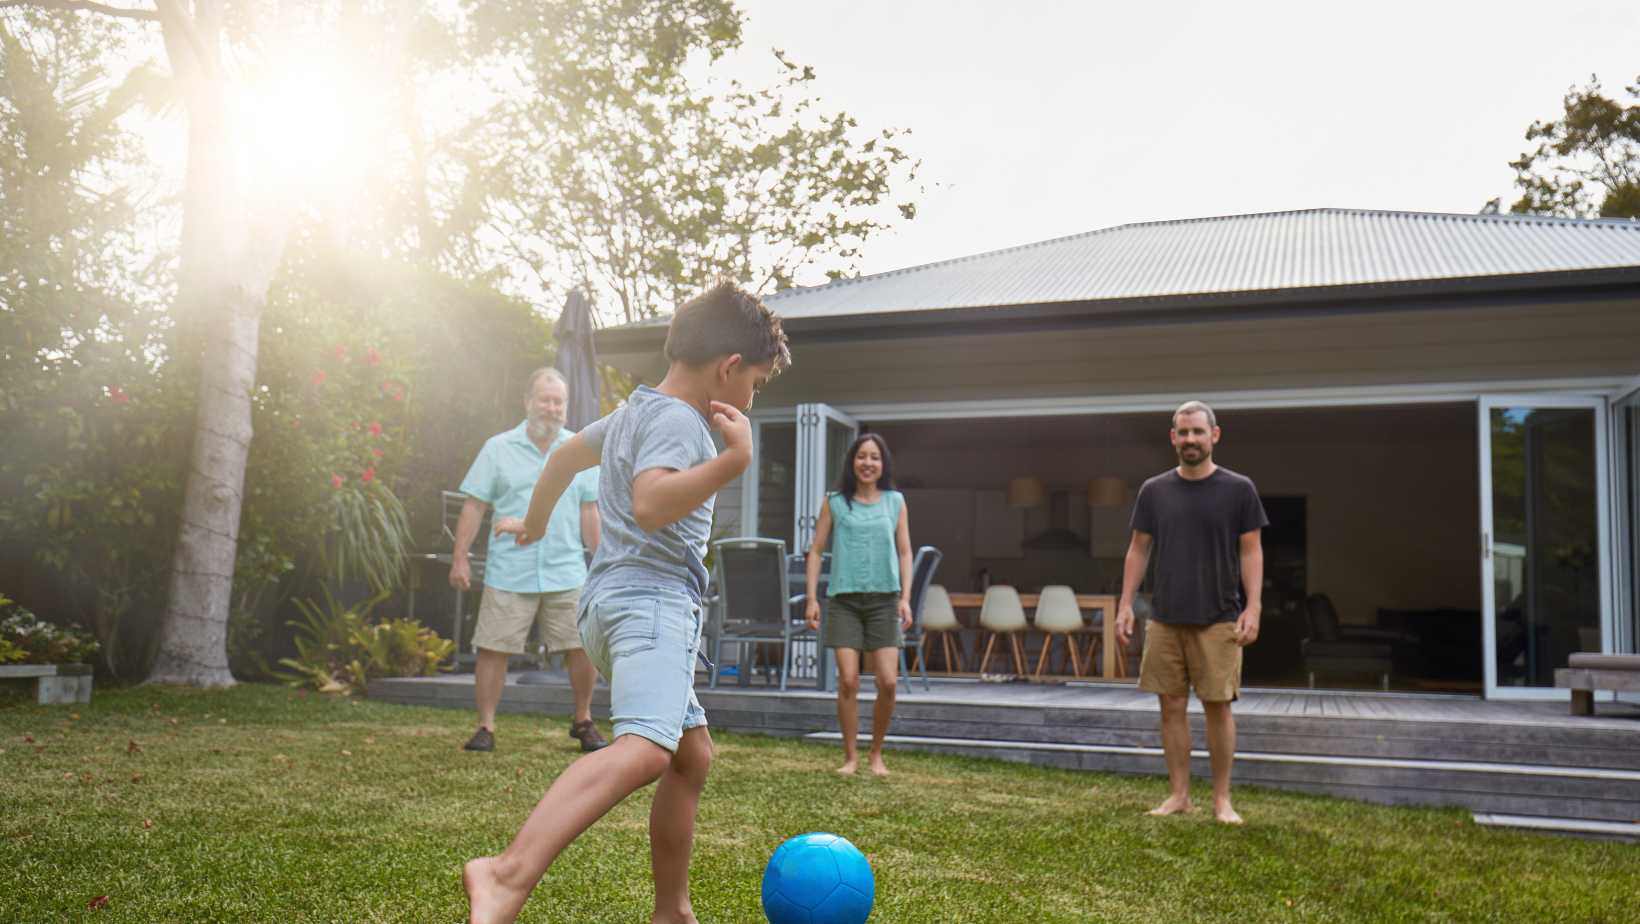 Child kicking ball in back yard with parents and grandfather